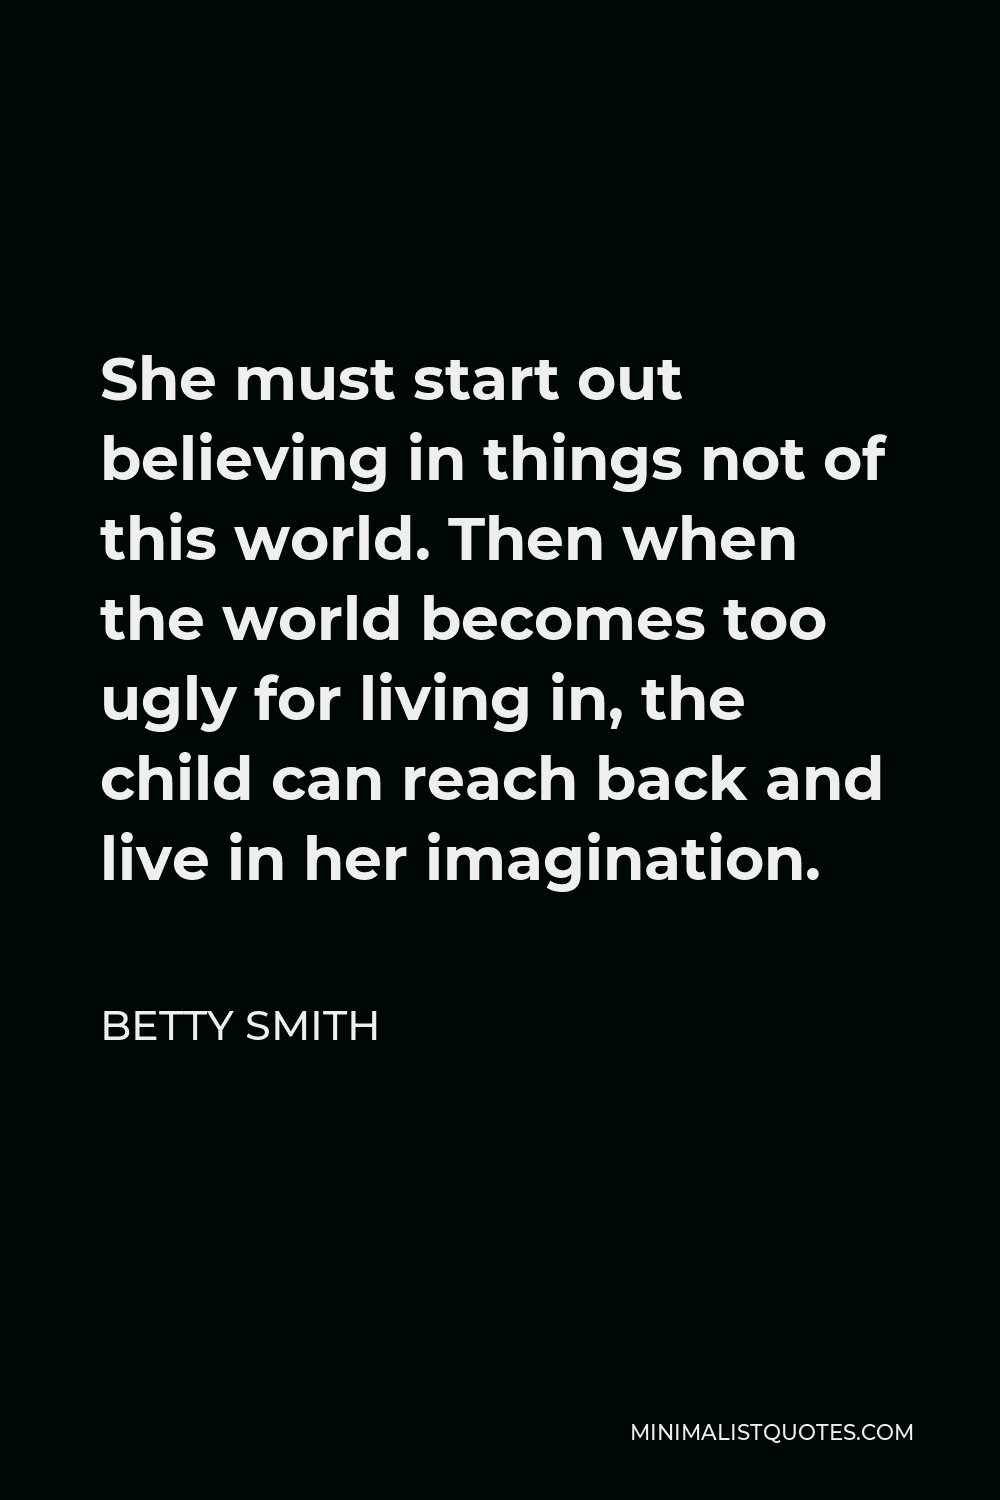 Betty Smith Quote - She must start out believing in things not of this world. Then when the world becomes too ugly for living in, the child can reach back and live in her imagination.